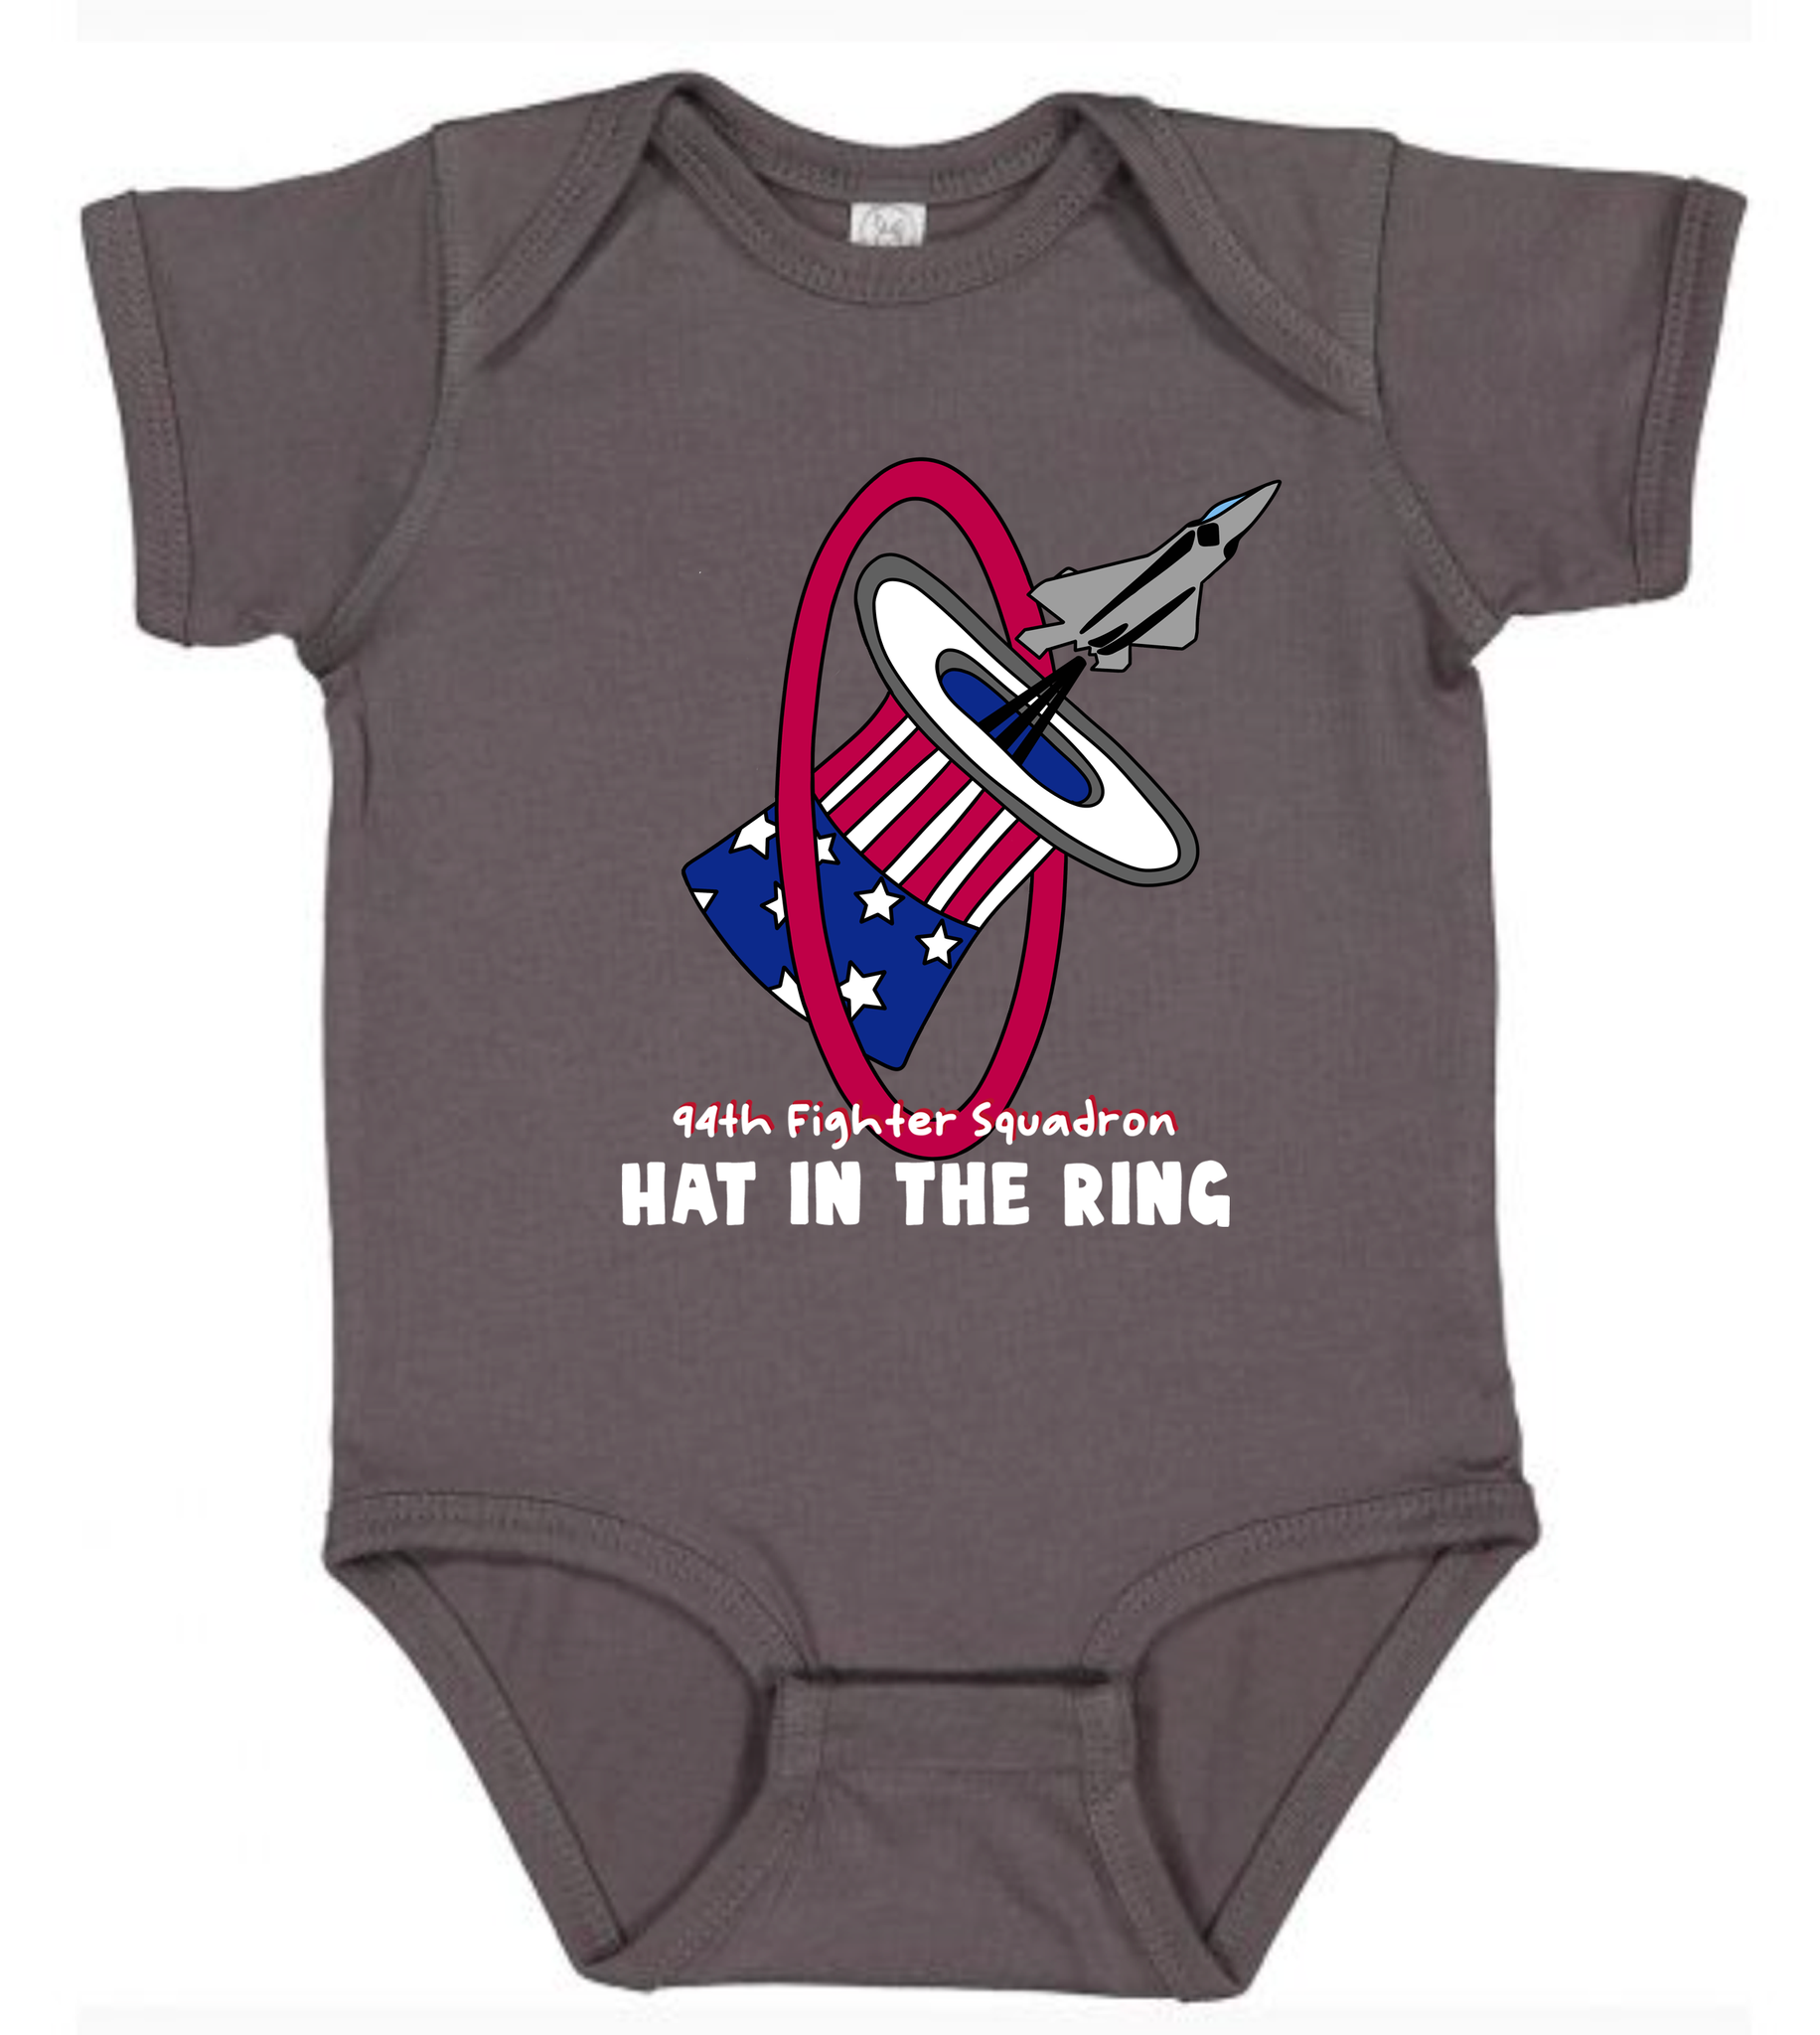 94th Fighter Squadron Baby Onesie